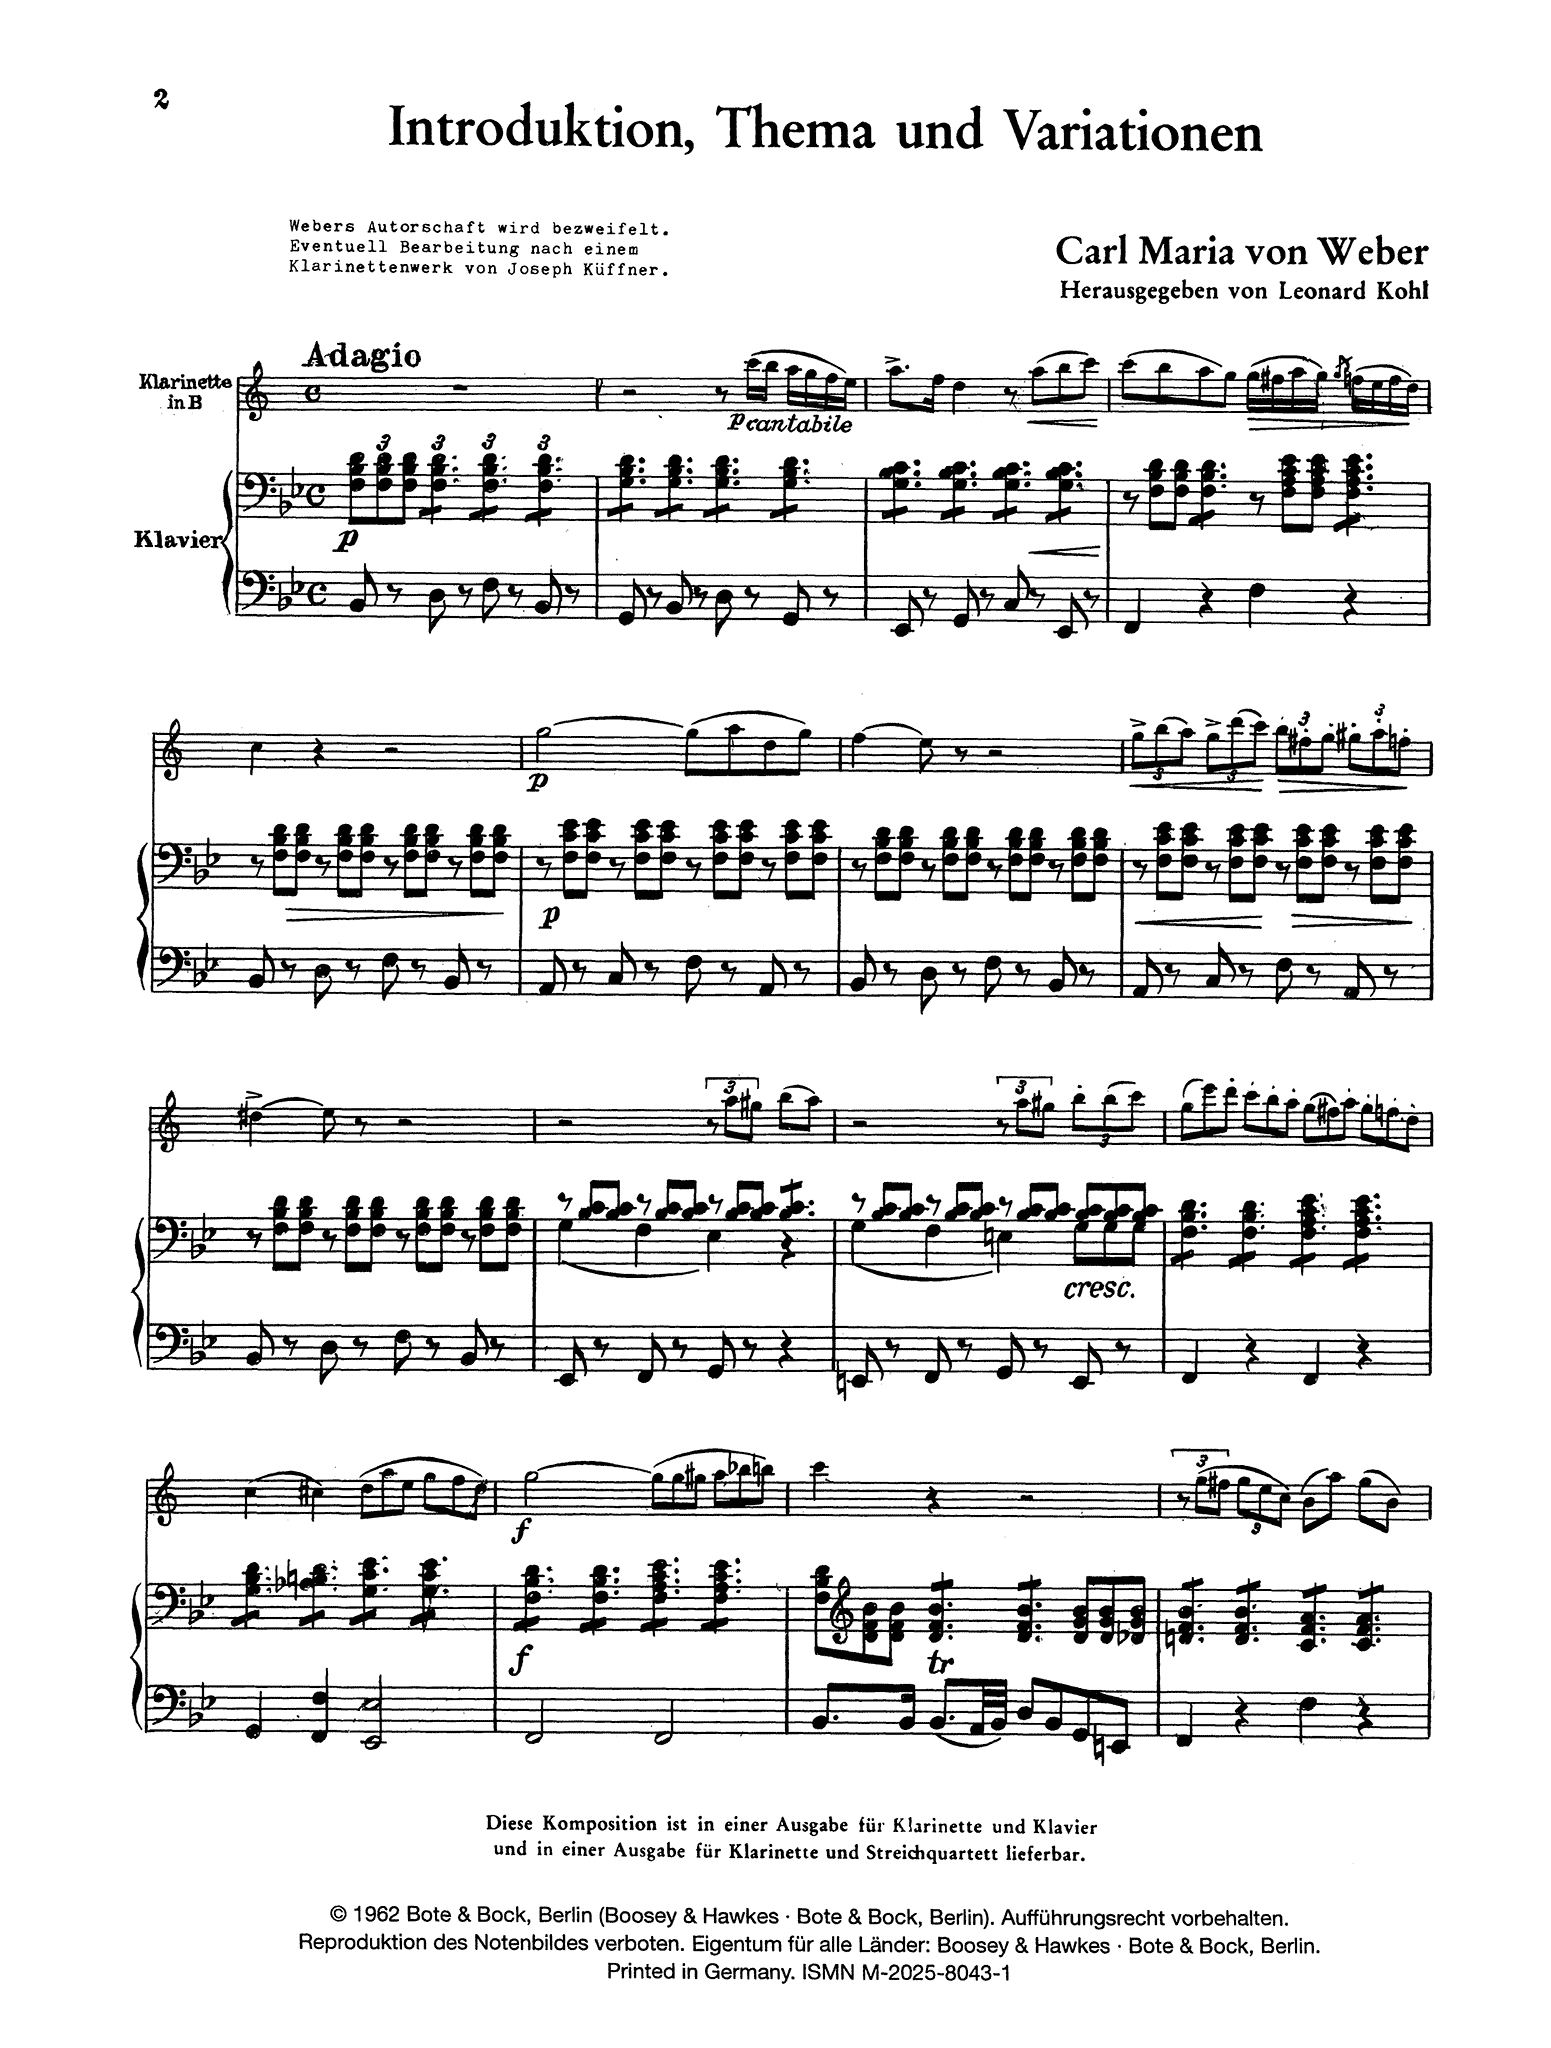 Introduction, Theme & Variations, Op. 32 Score